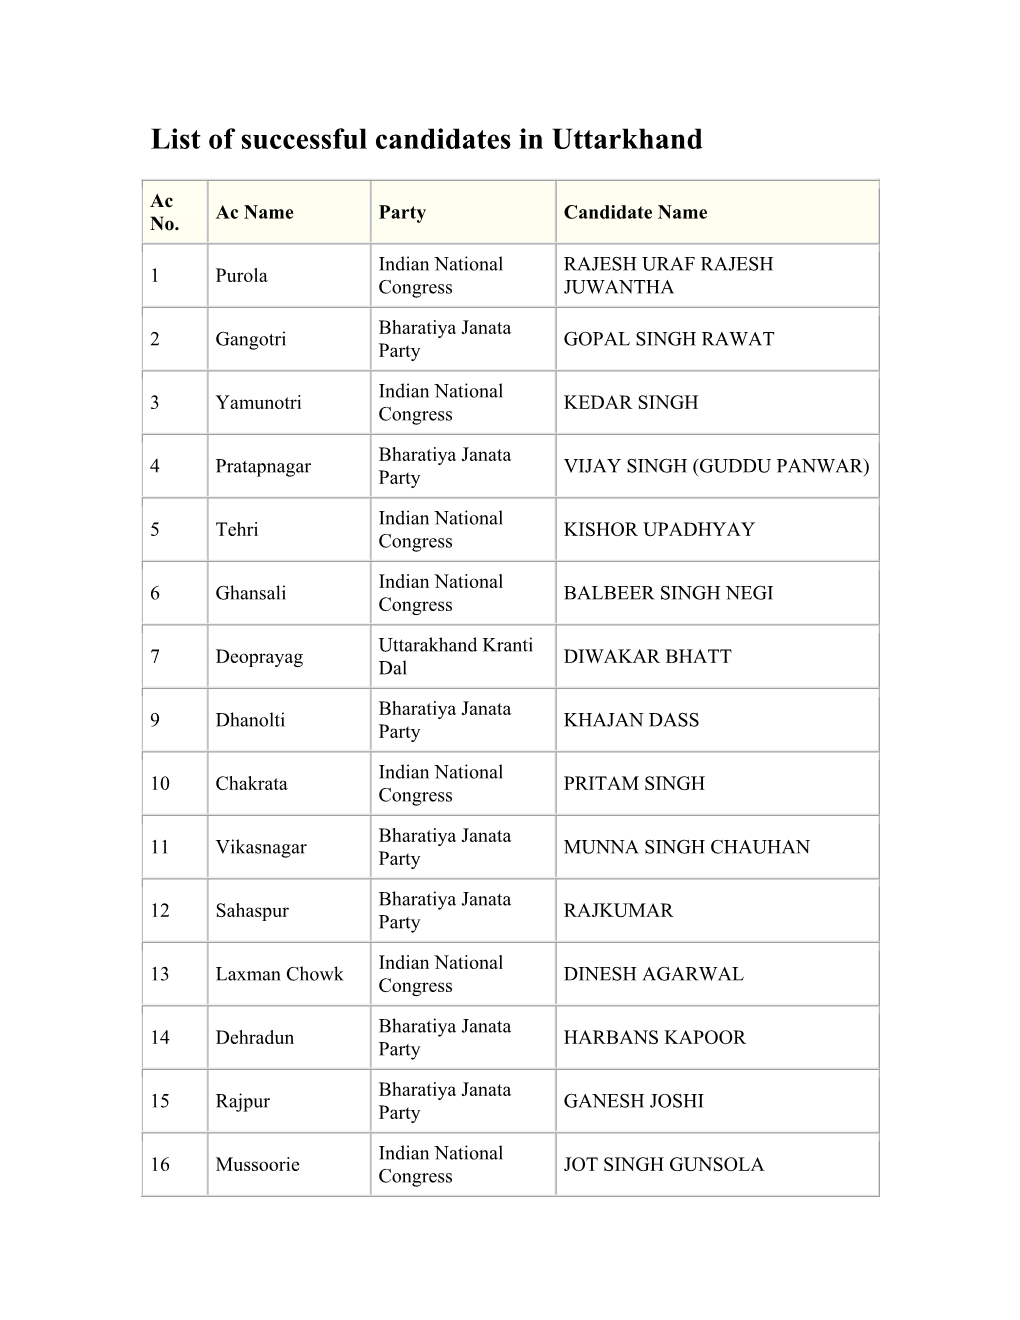 List of Successful Candidates in Uttarkhand